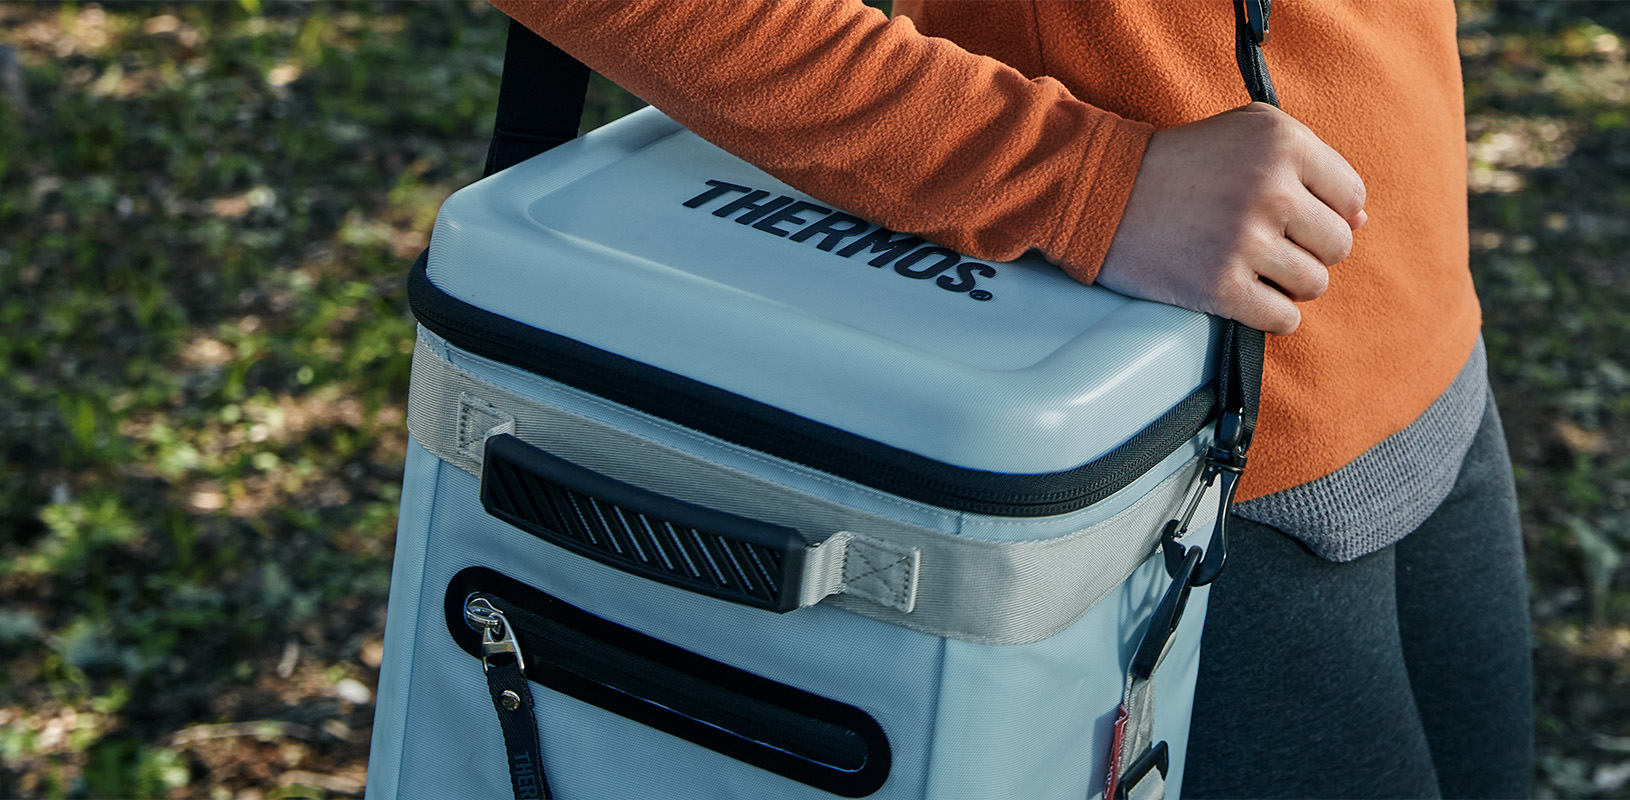 Thermos – Brand Coolers